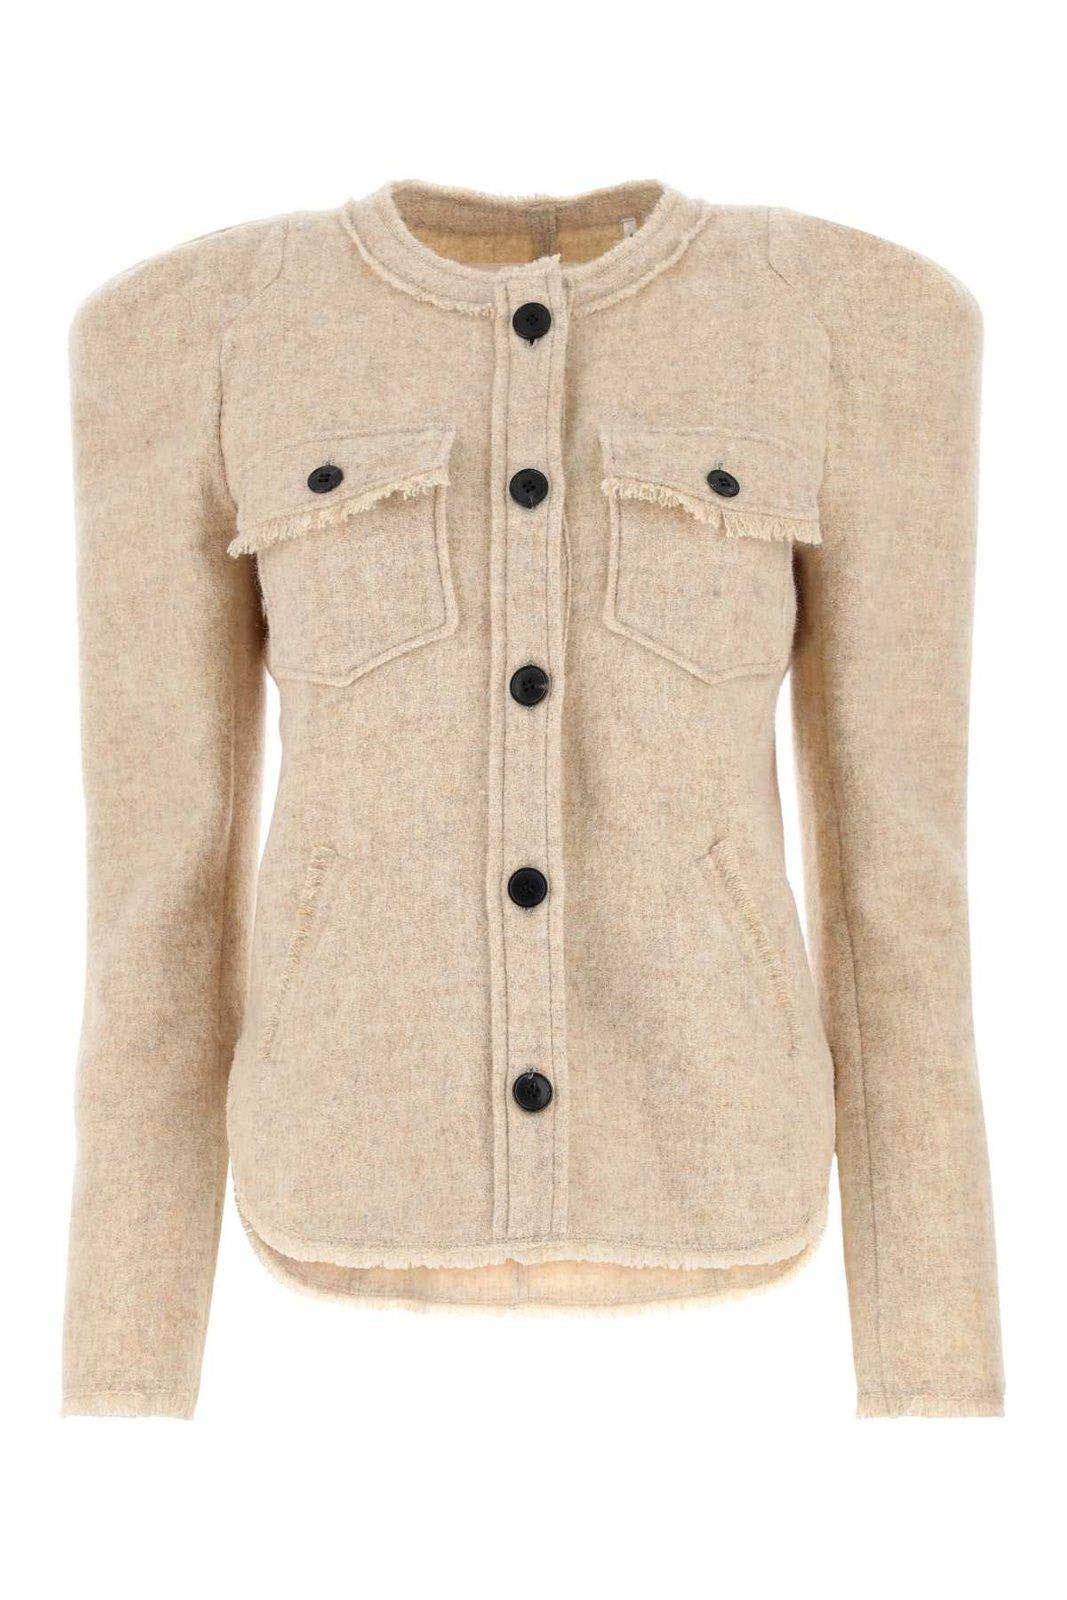 ISABEL MARANT ÉTOILE BUTTONED KNITTED CARDIGAN